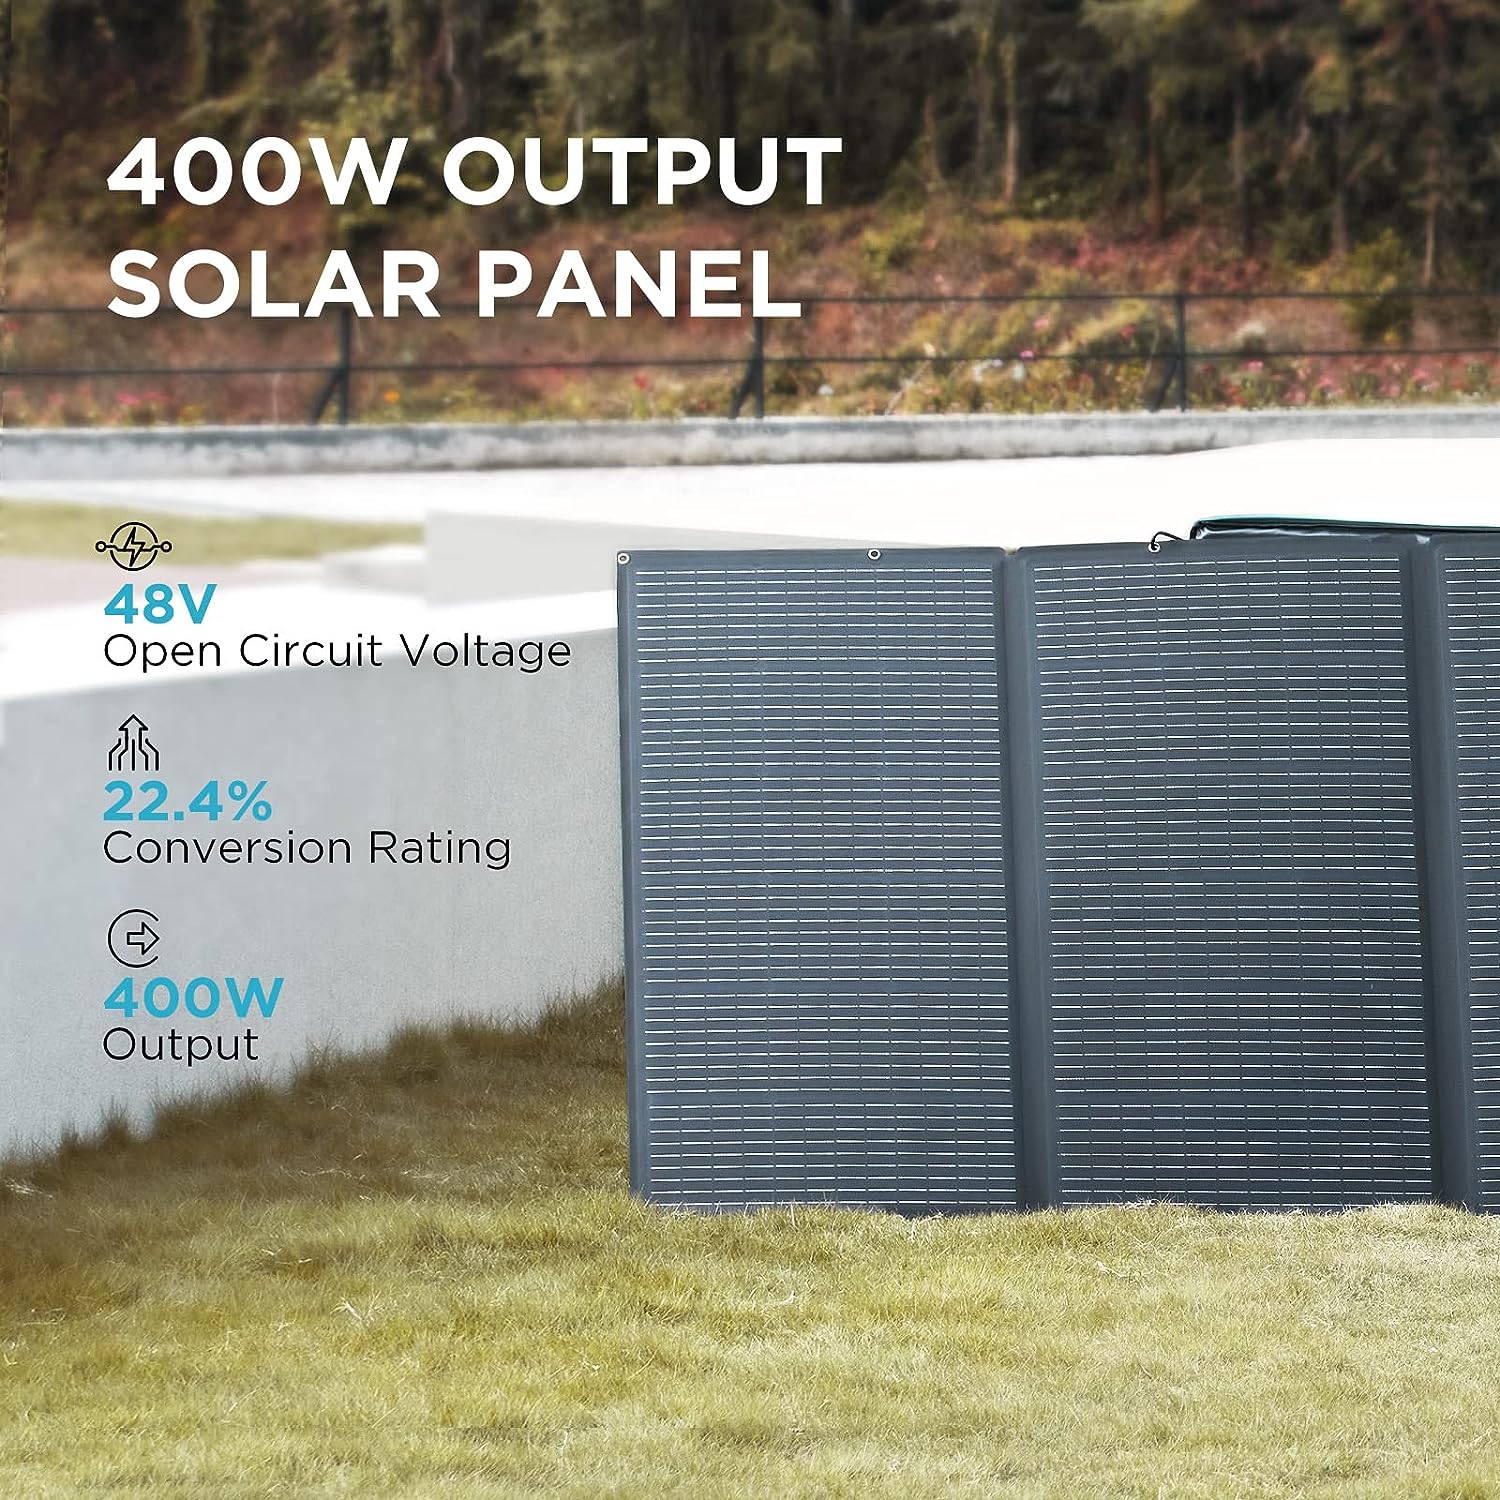 EF ECOFLOW 400W Portable Solar Panel, Foldable & Durable, Complete with an Adjustable Kickstand Case, Waterproof IP68 for Outdoor Adventures